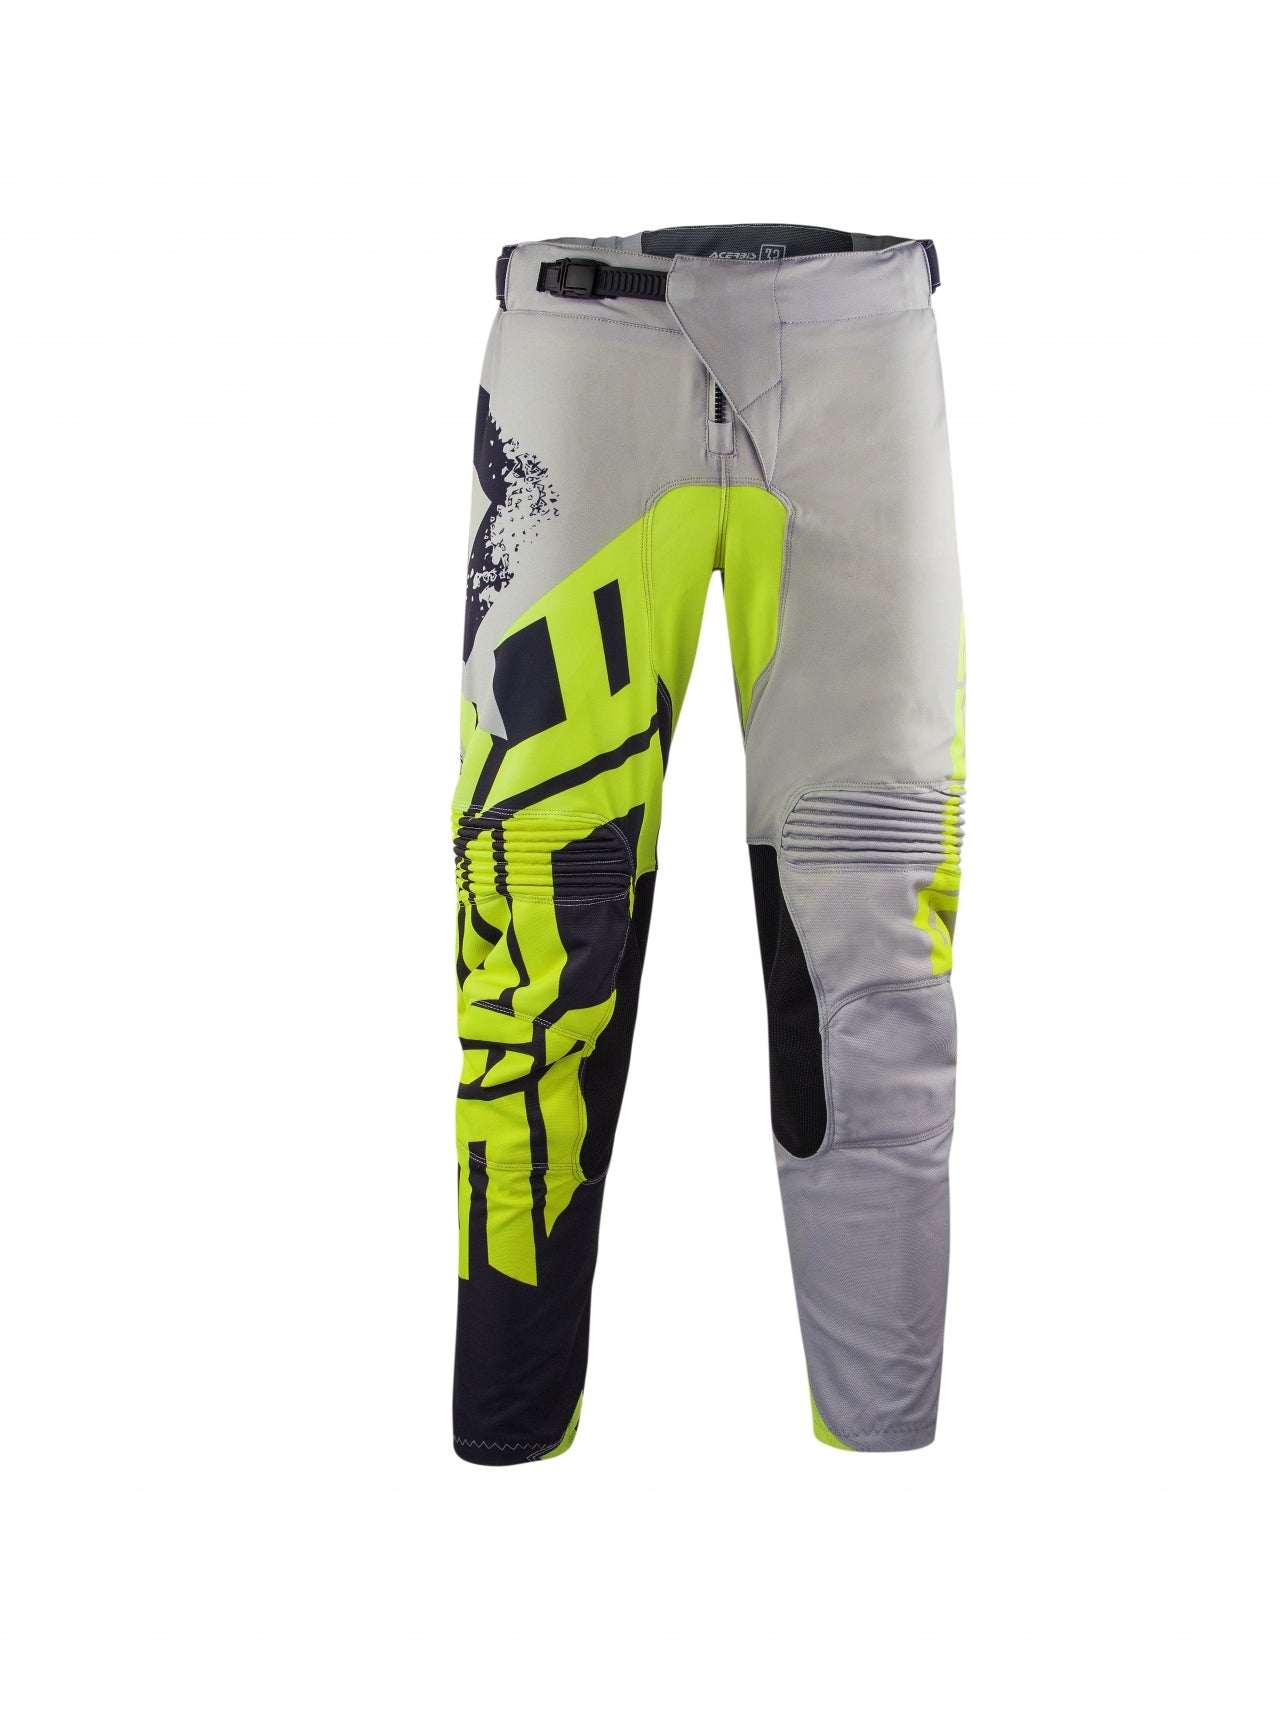 **AEROTUNED SPECIAL EDITION PANT